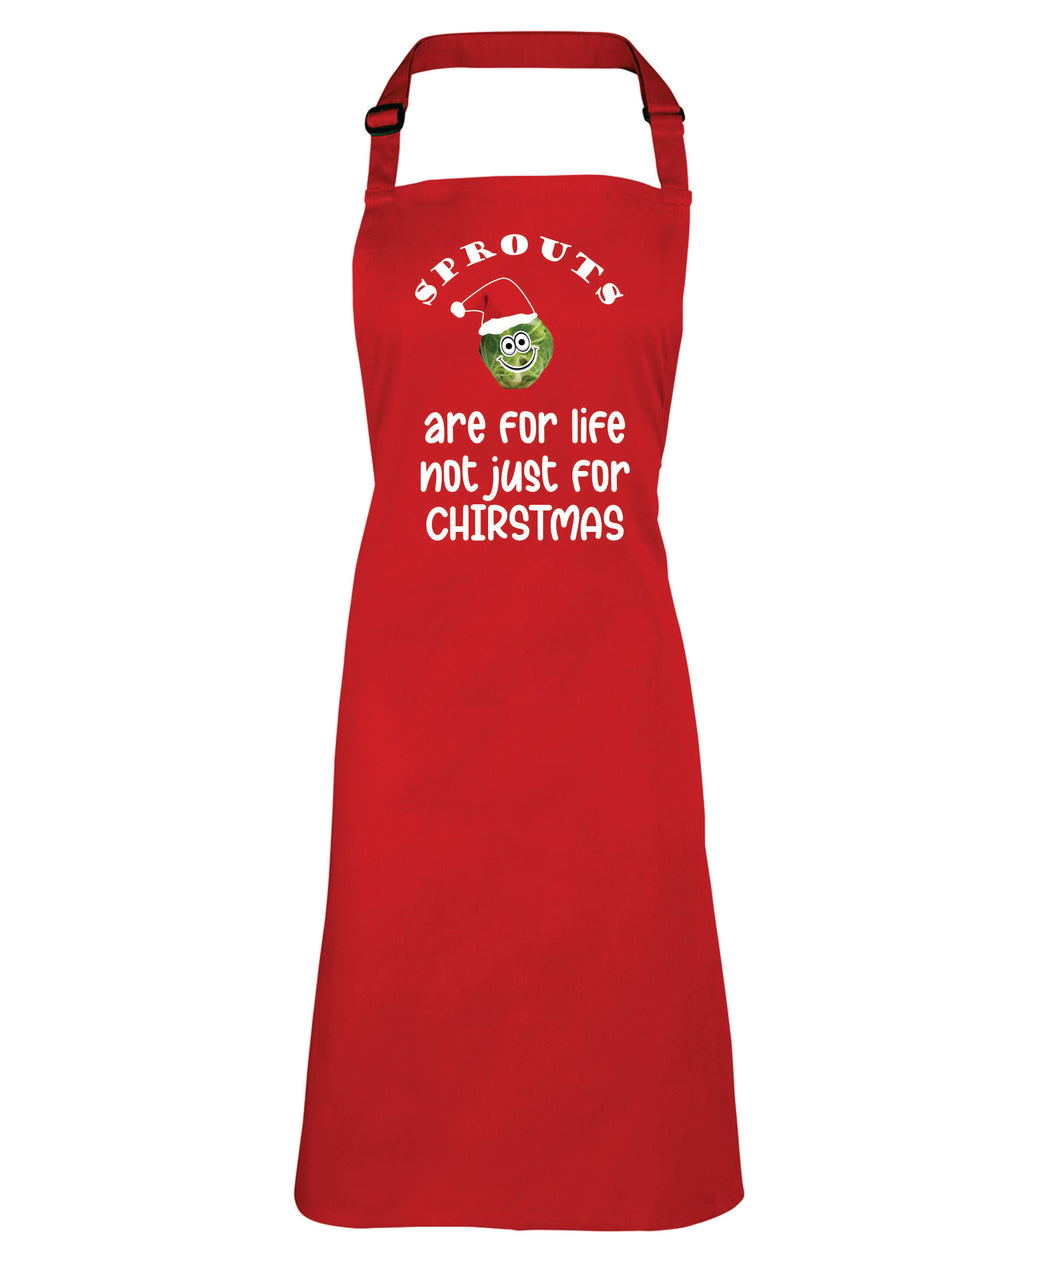 Christmas Apron (Sprouts are for Life )